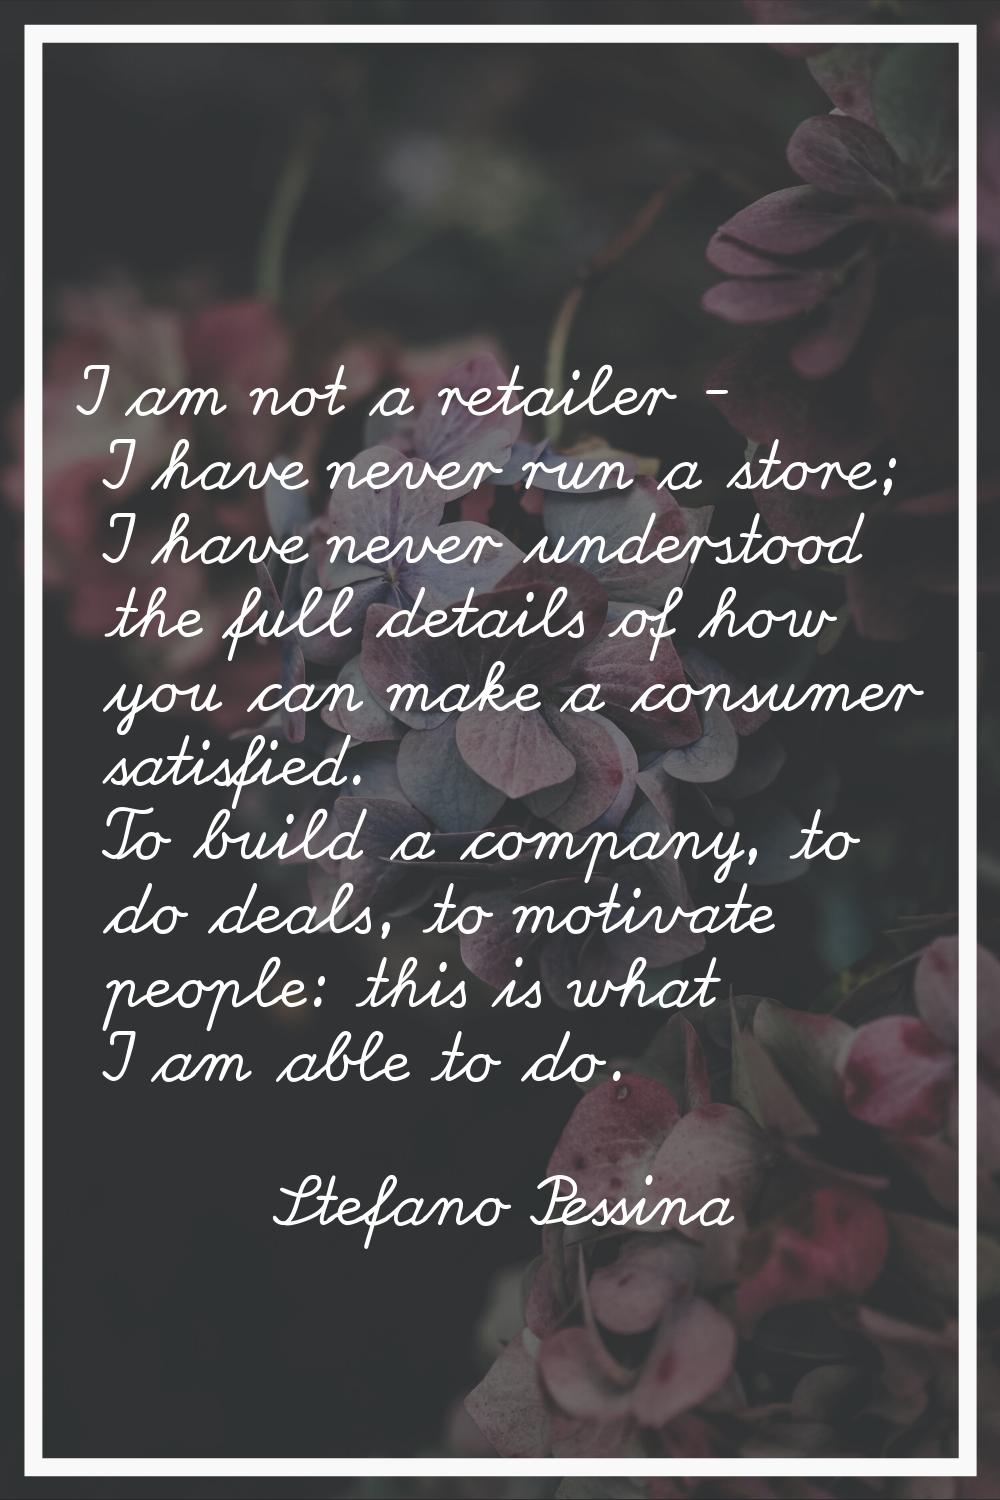 I am not a retailer - I have never run a store; I have never understood the full details of how you